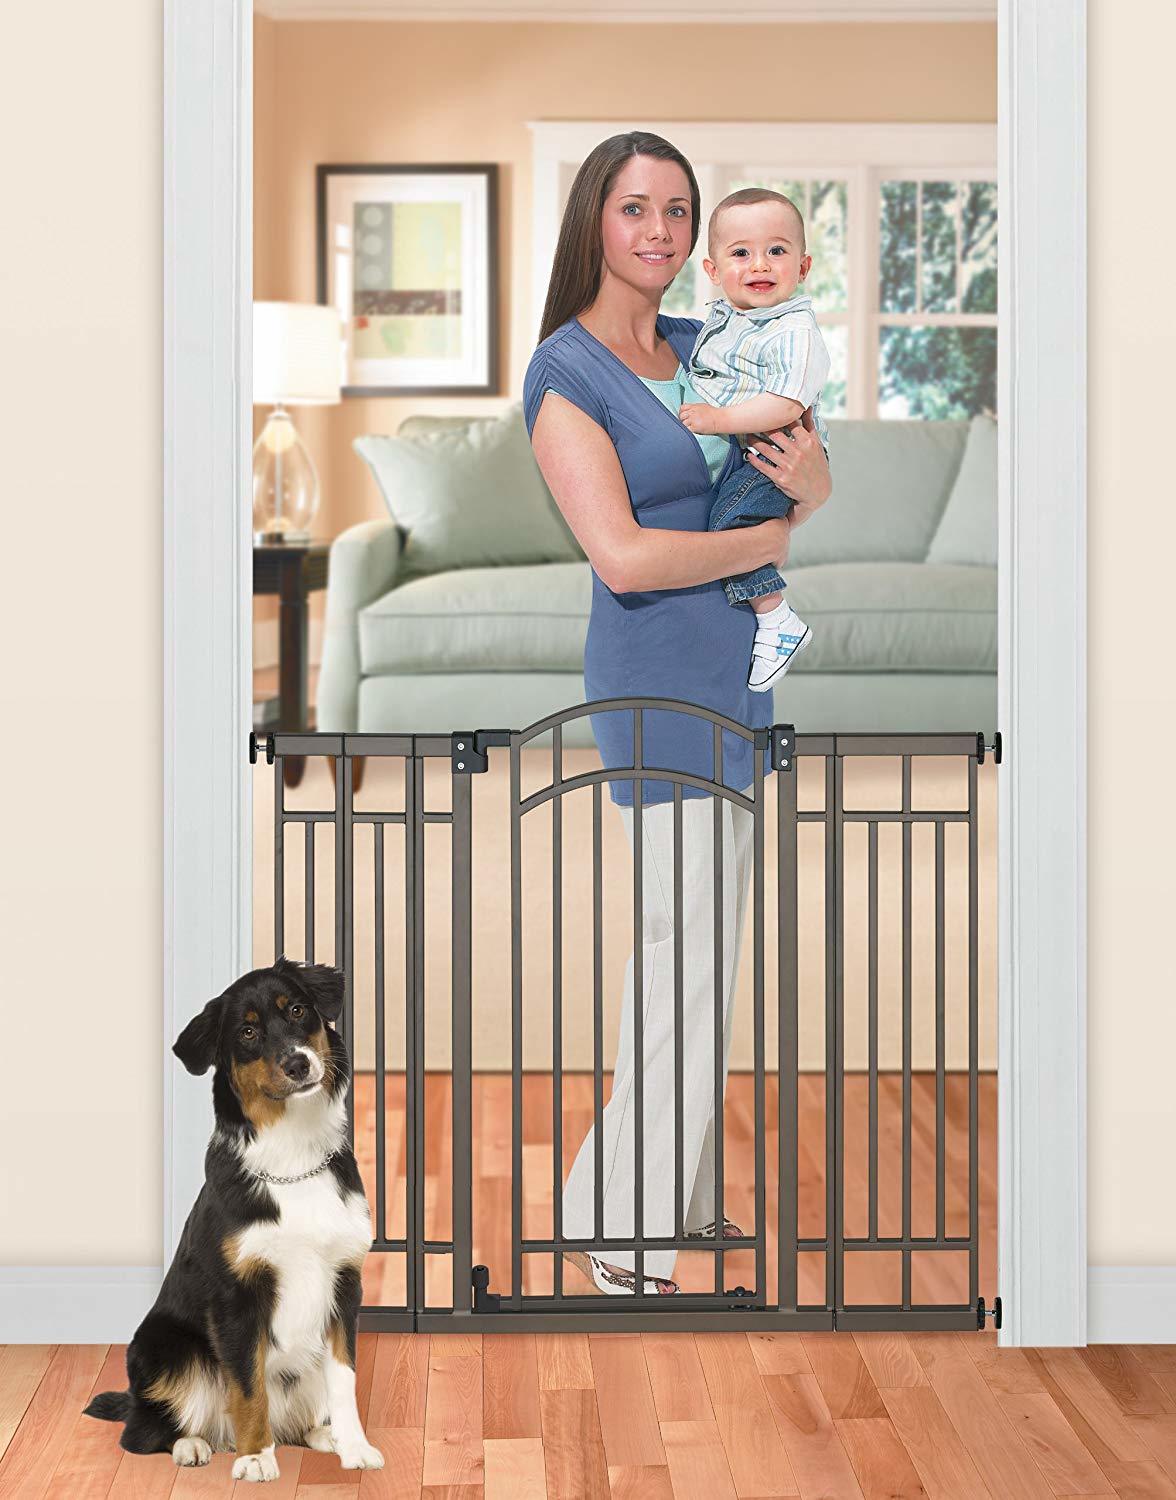 Summer Infant Multi-Use Deco Extra Tall Walk-Thru Baby Gate Review